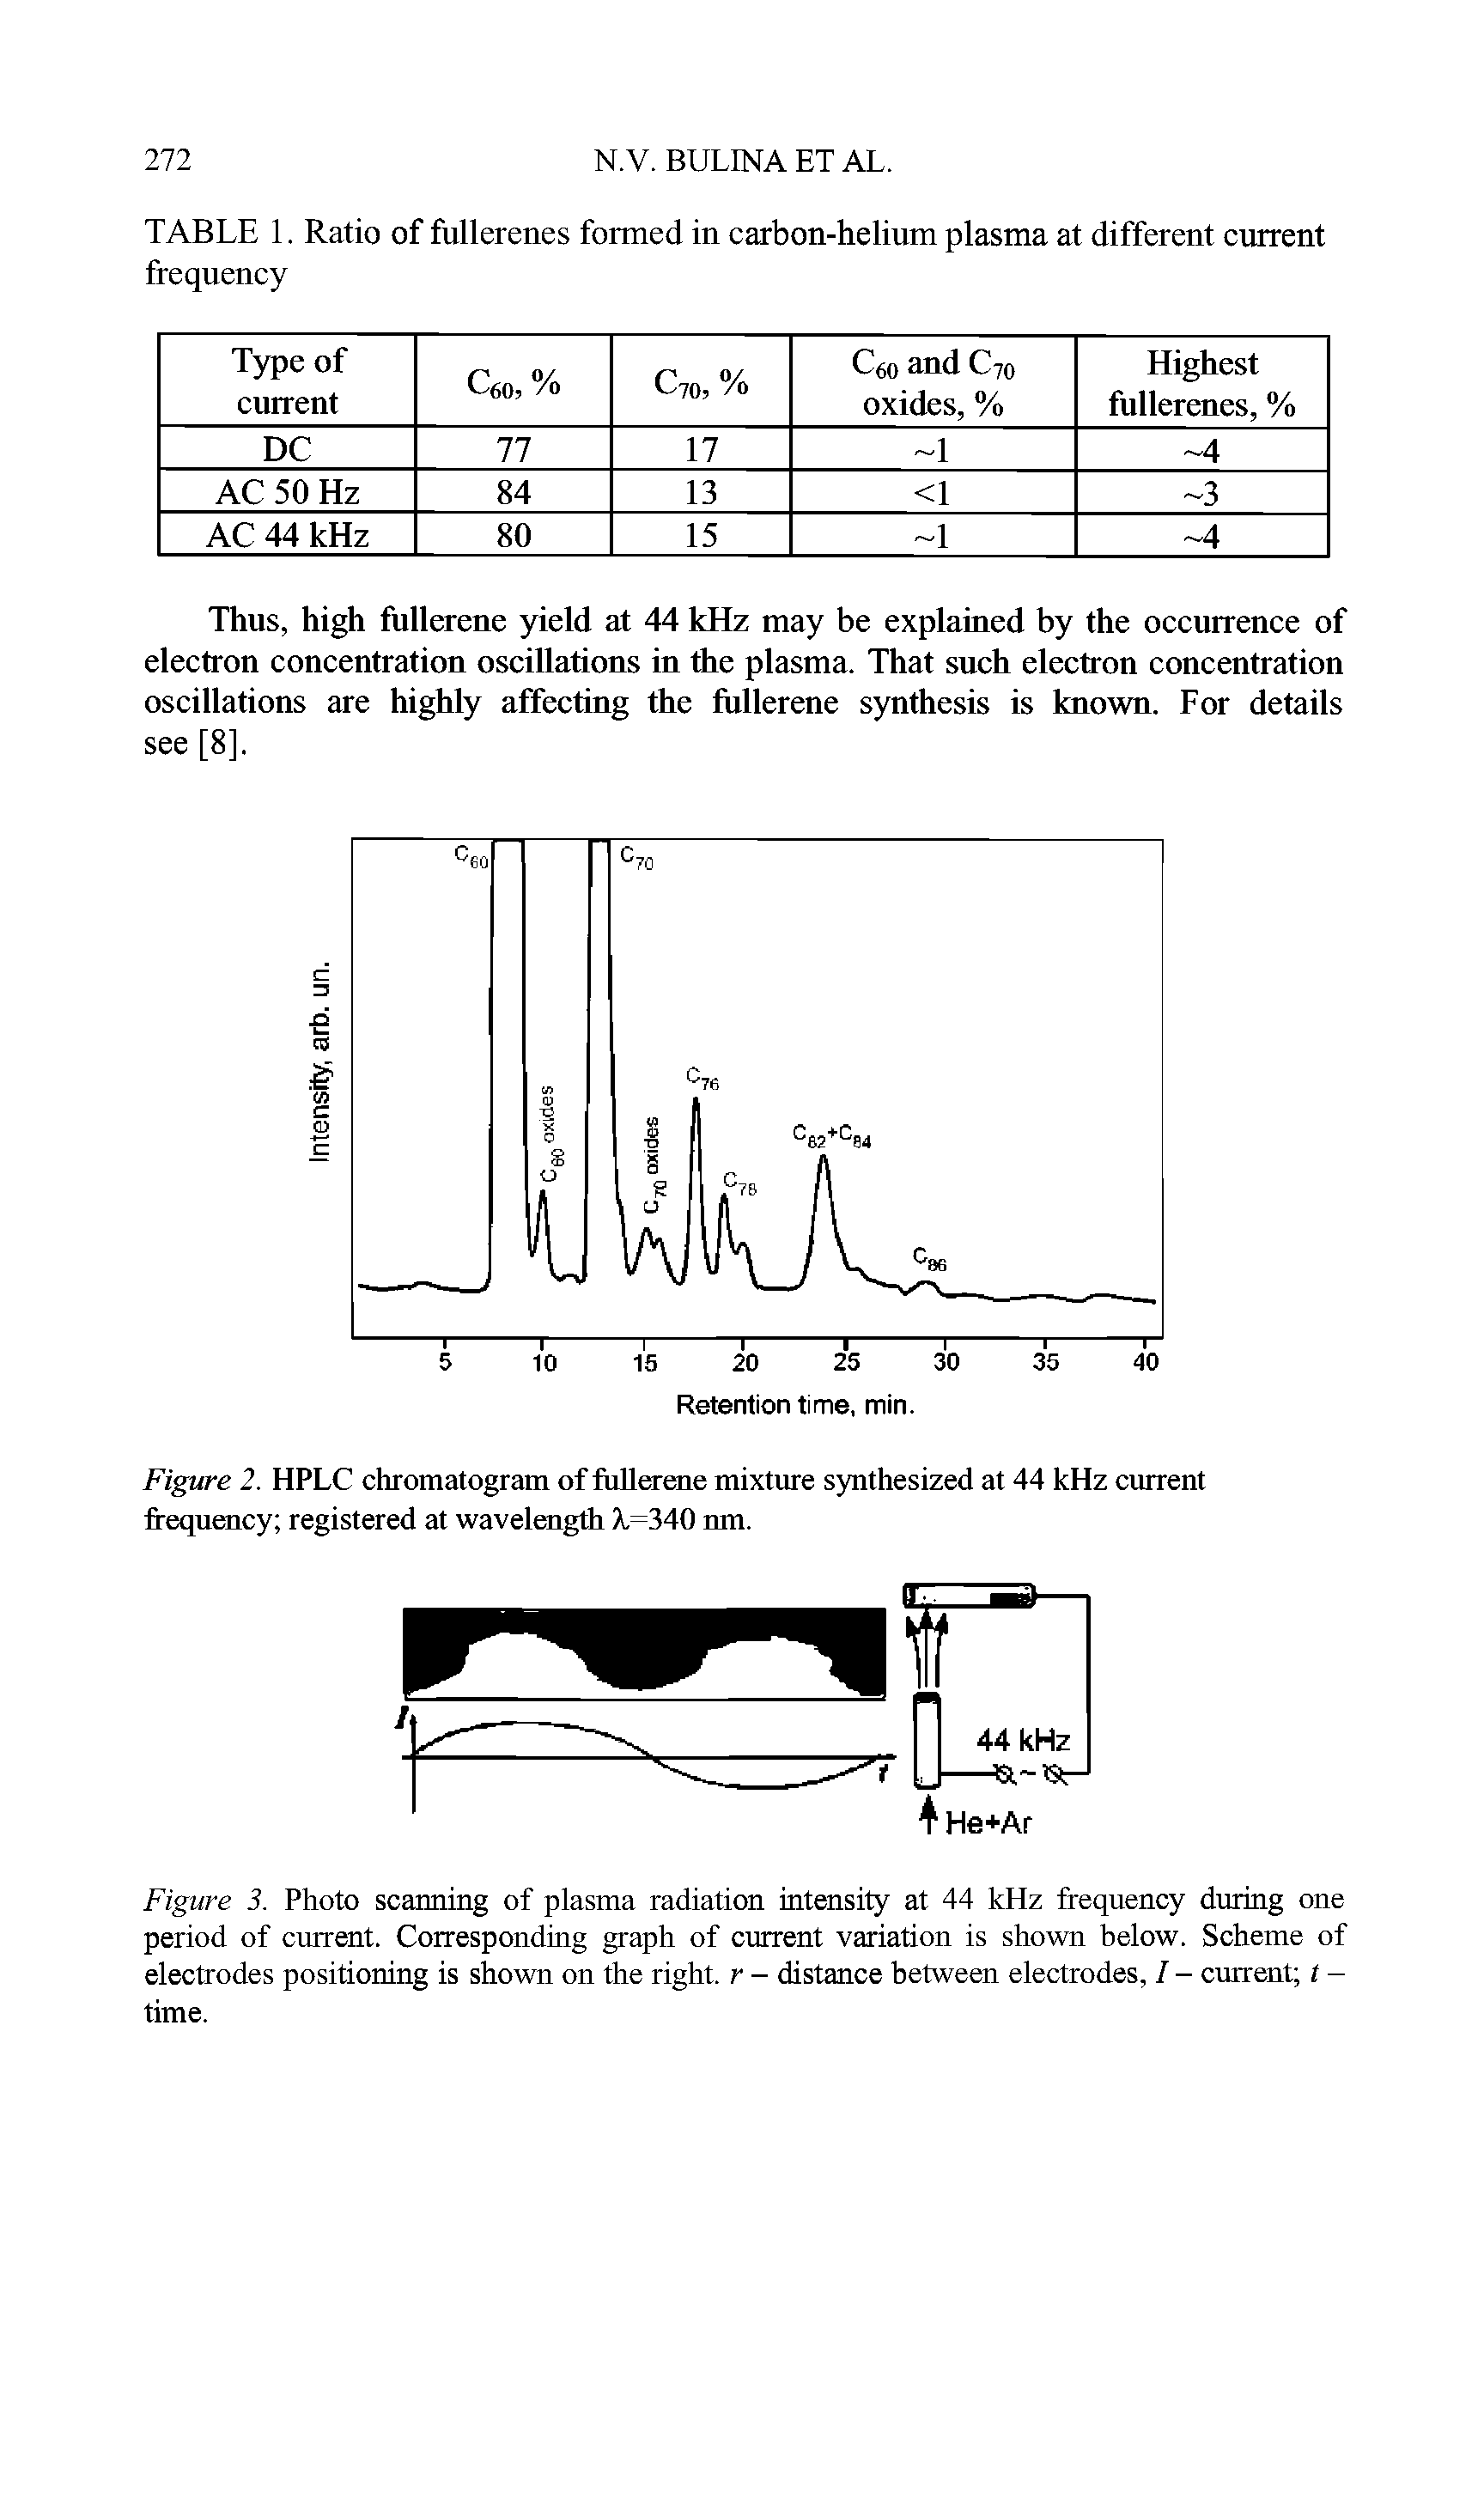 Figure 3. Photo scanning of plasma radiation intensity at 44 kHz frequency during one period of current. Corresponding graph of current variation is shown below. Scheme of electrodes positioning is shown on the right, r - distance between electrodes, I - current t -time.